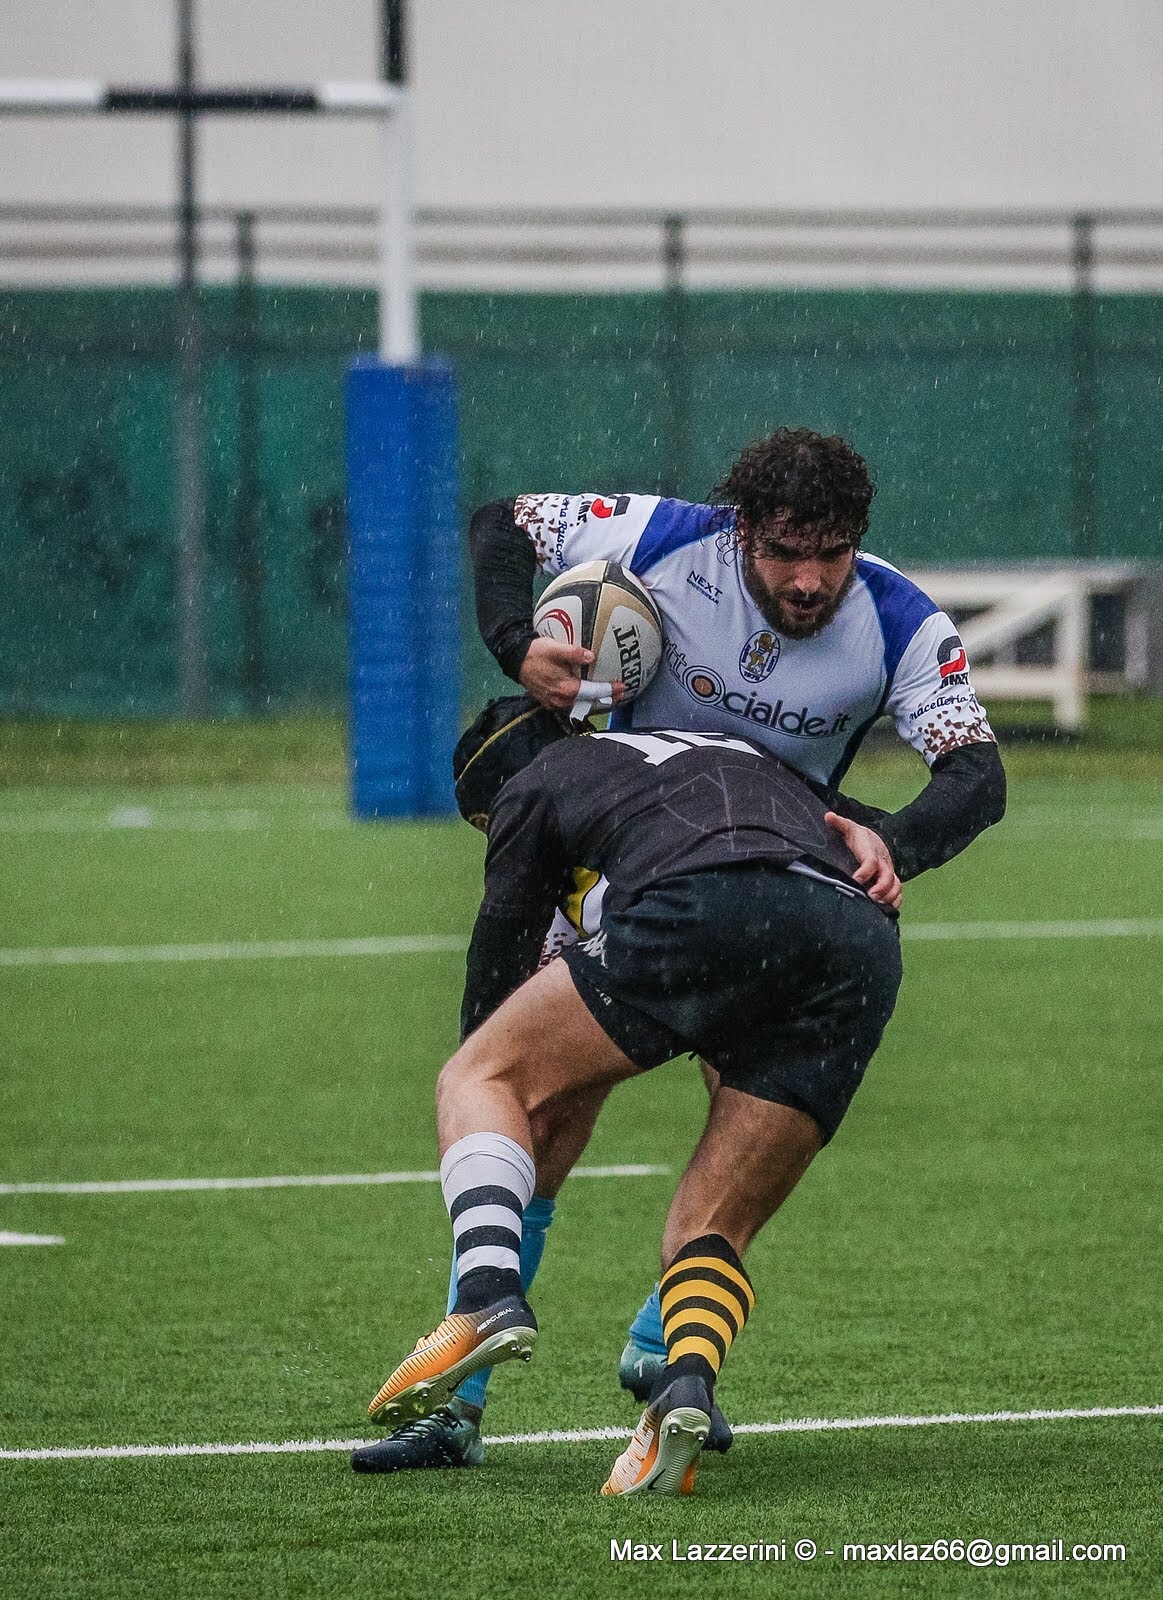 AmatoriUnion Milan vs Rugby Lecco...